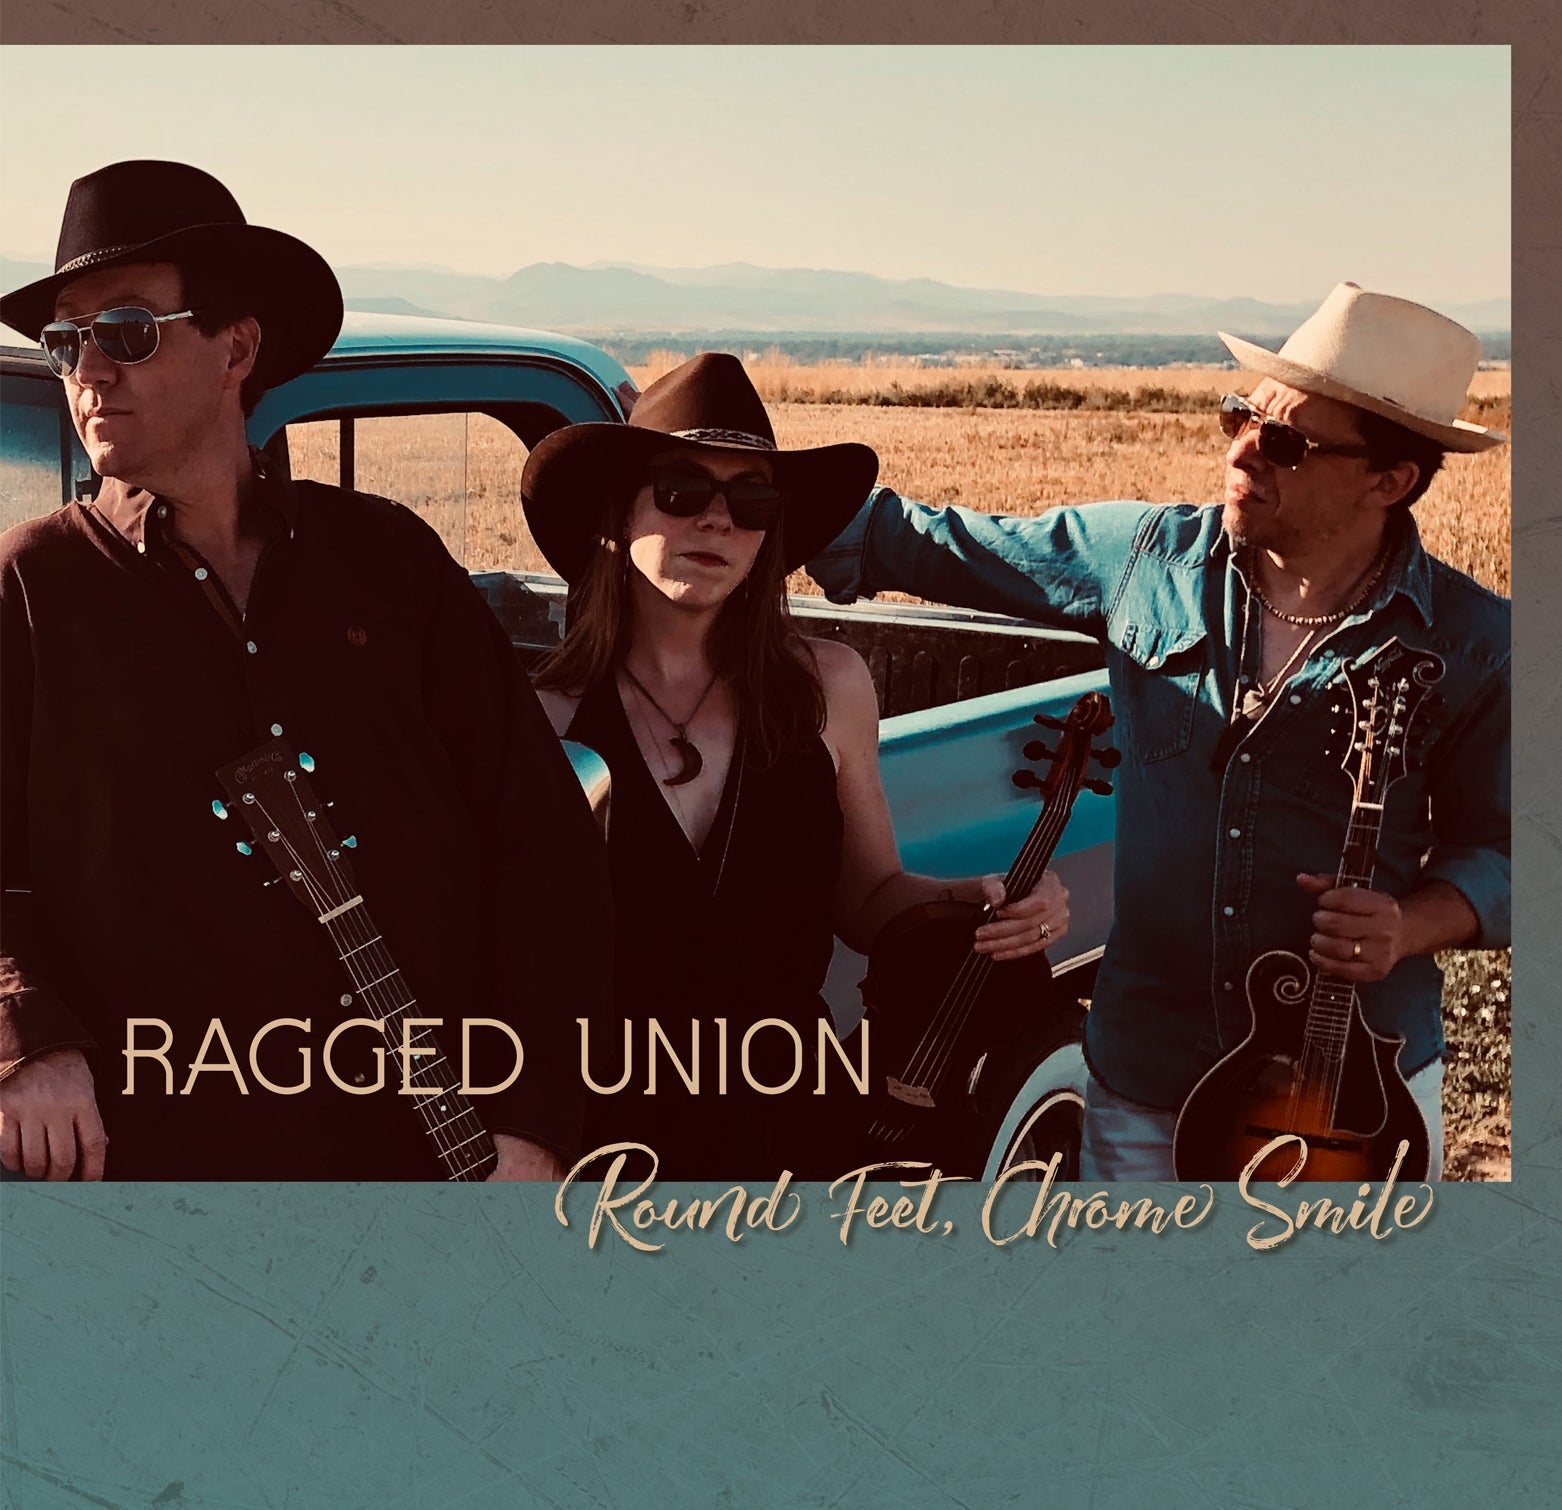 Luther Strings Presents: Ragged Union - Concert Ticket Reservation - Saturday, August 17th at 4:30pm